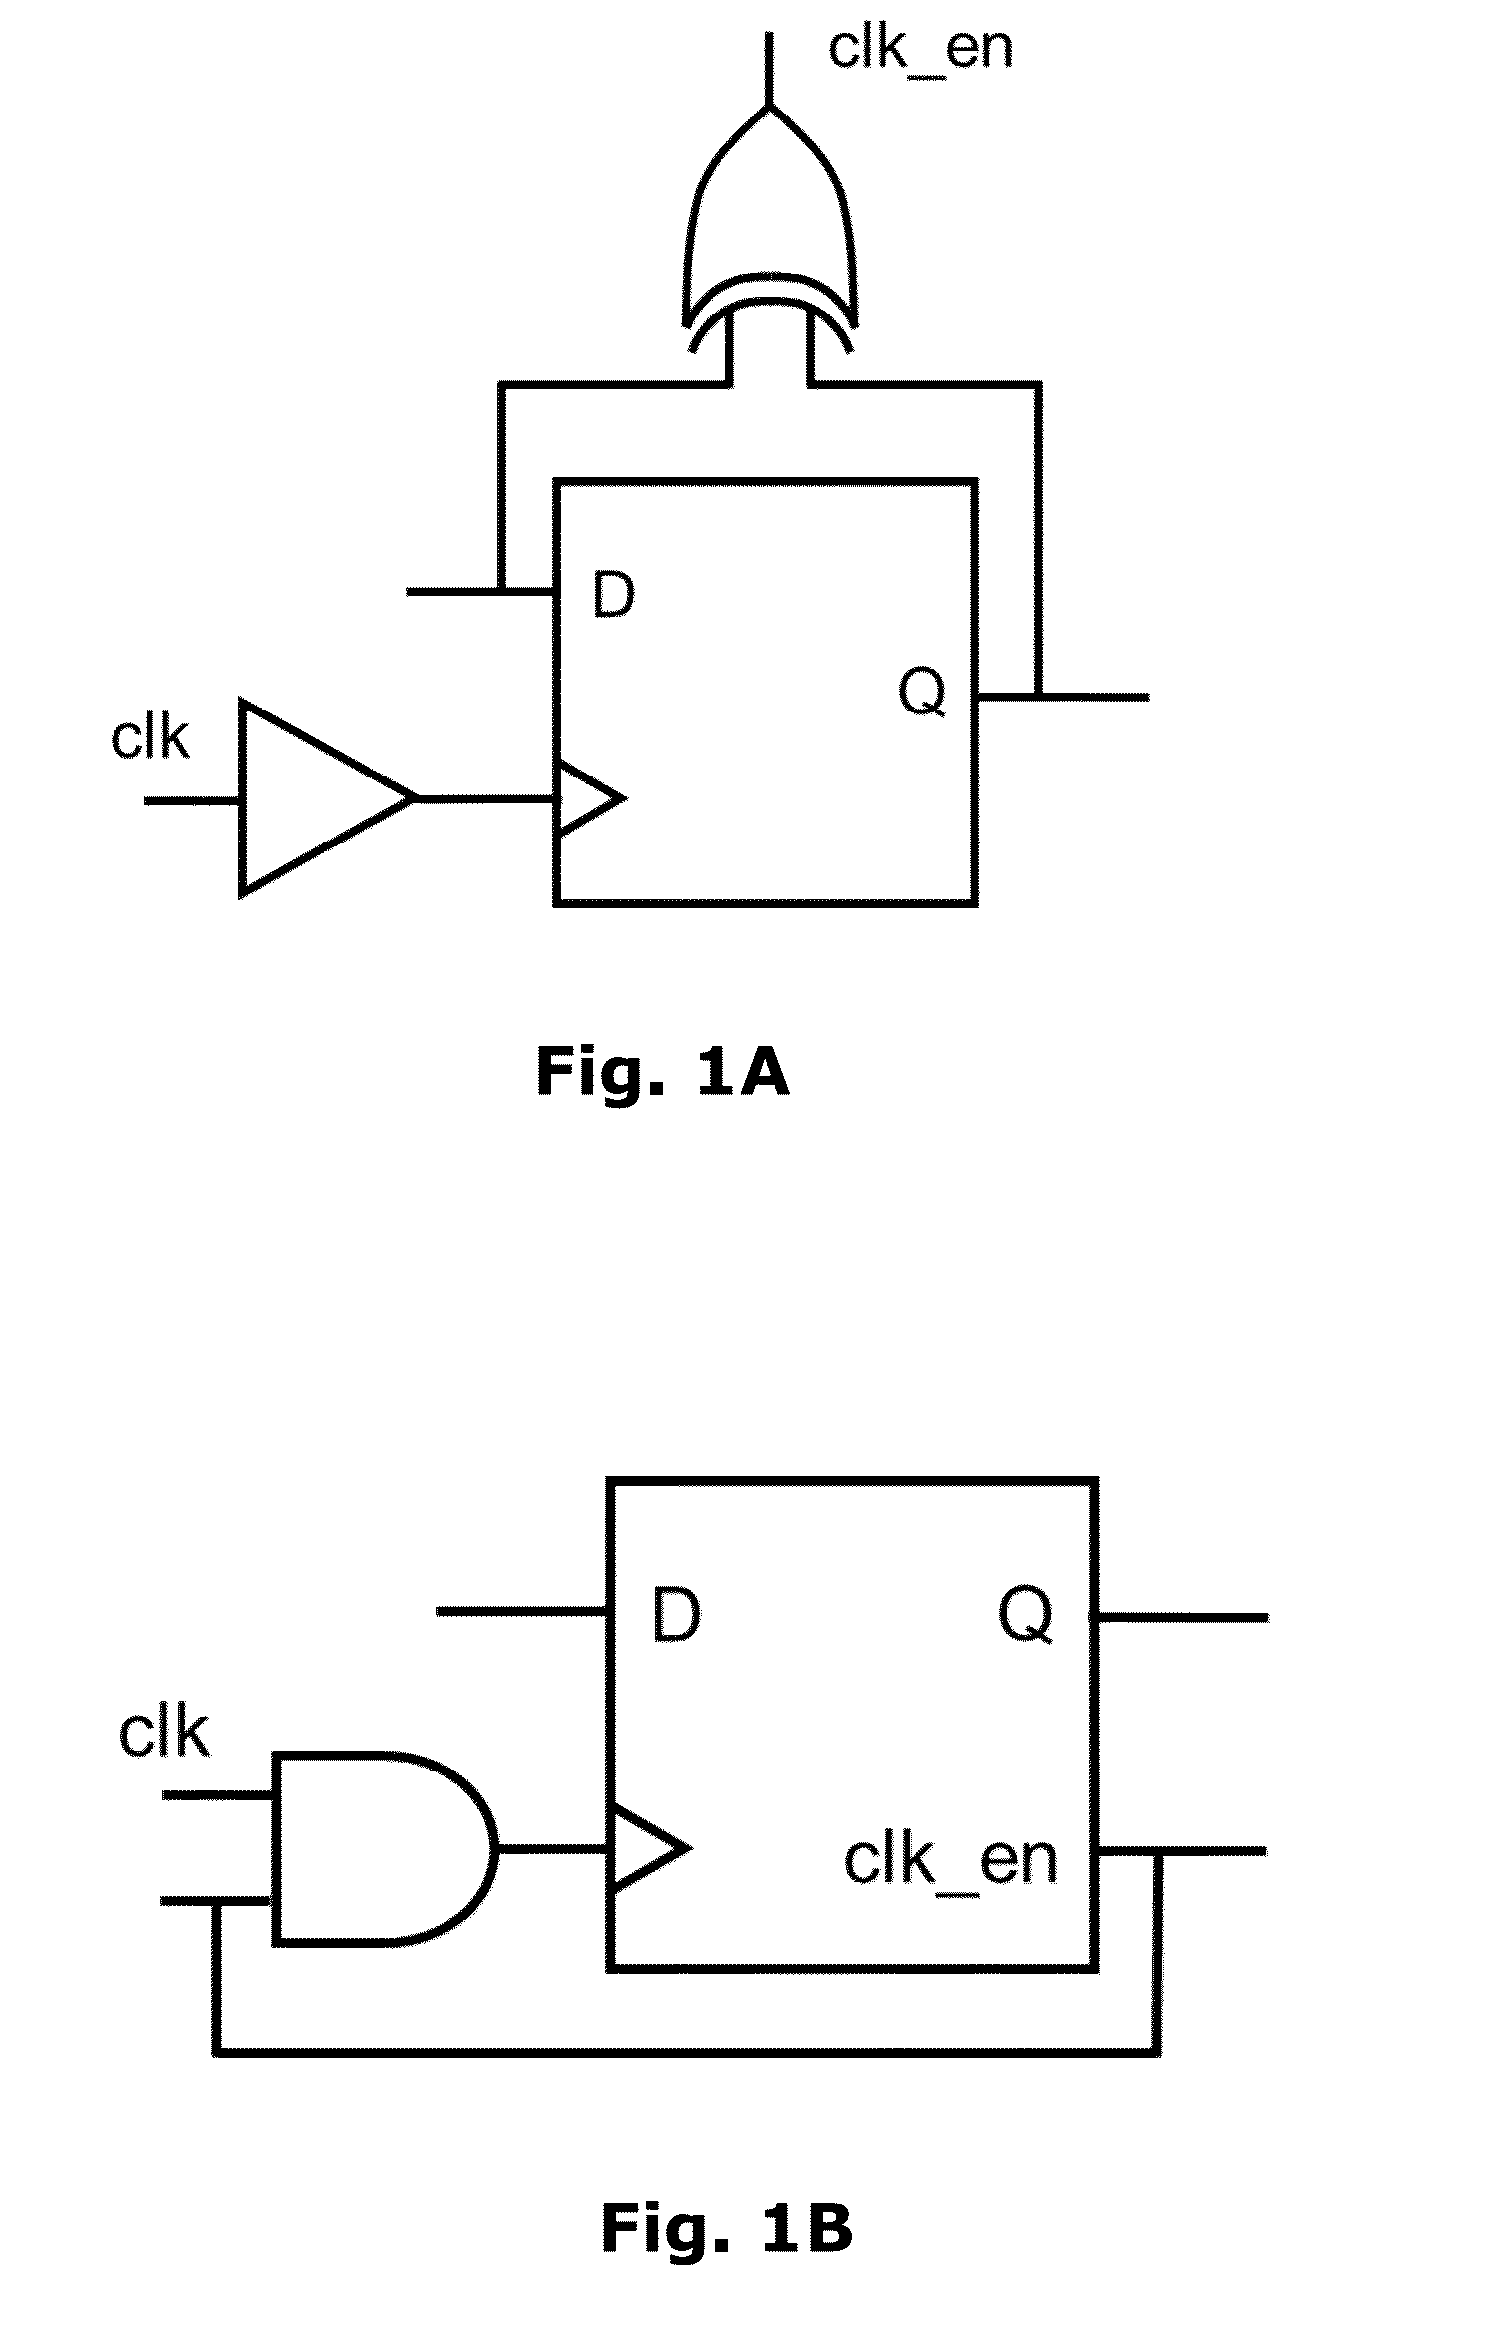 System and method for generating a clock gating network for logic circuits